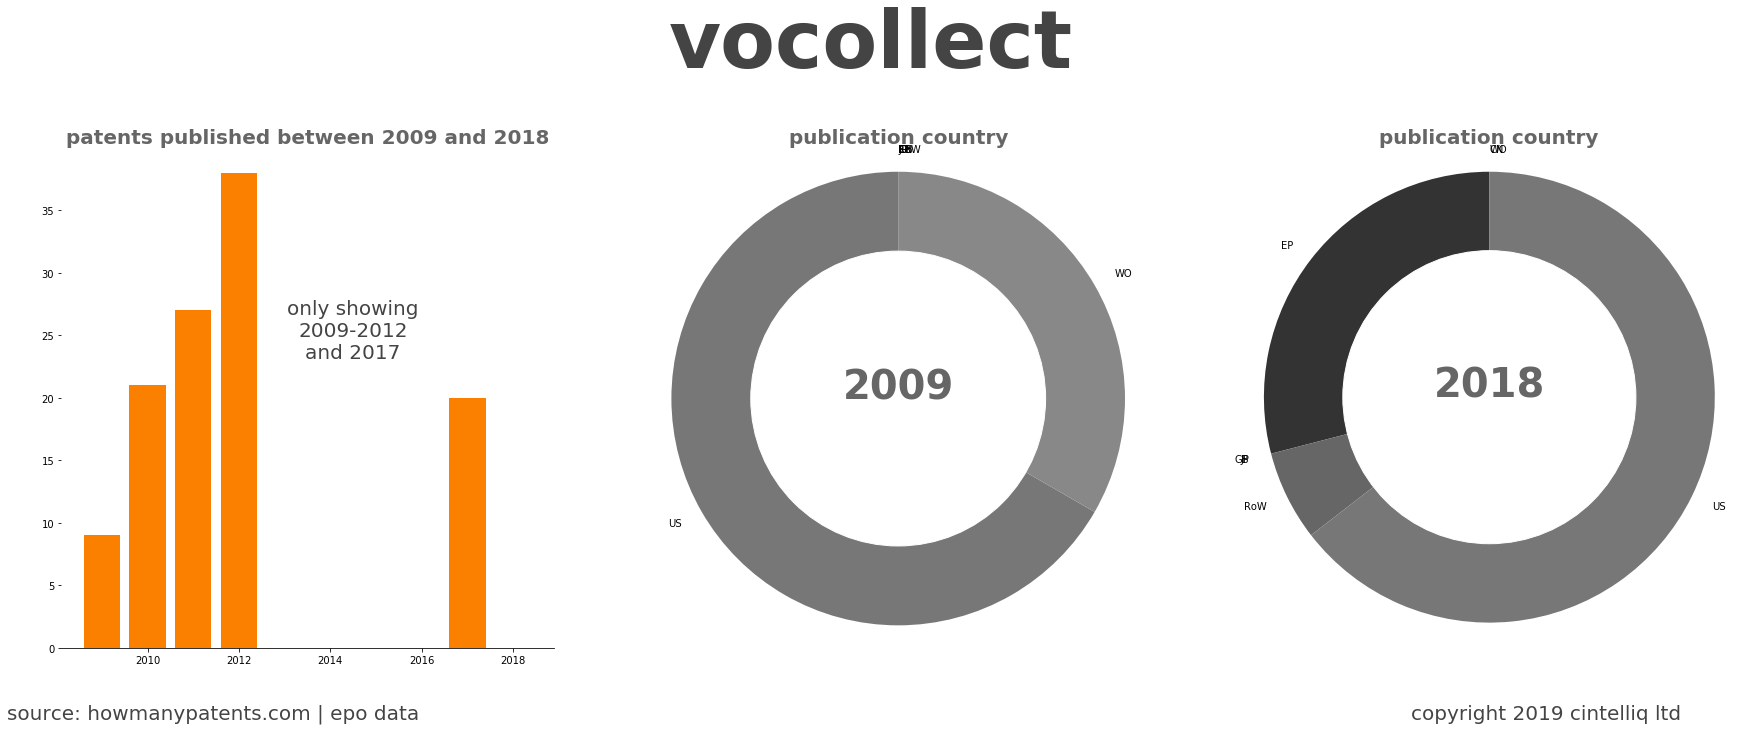 summary of patents for Vocollect